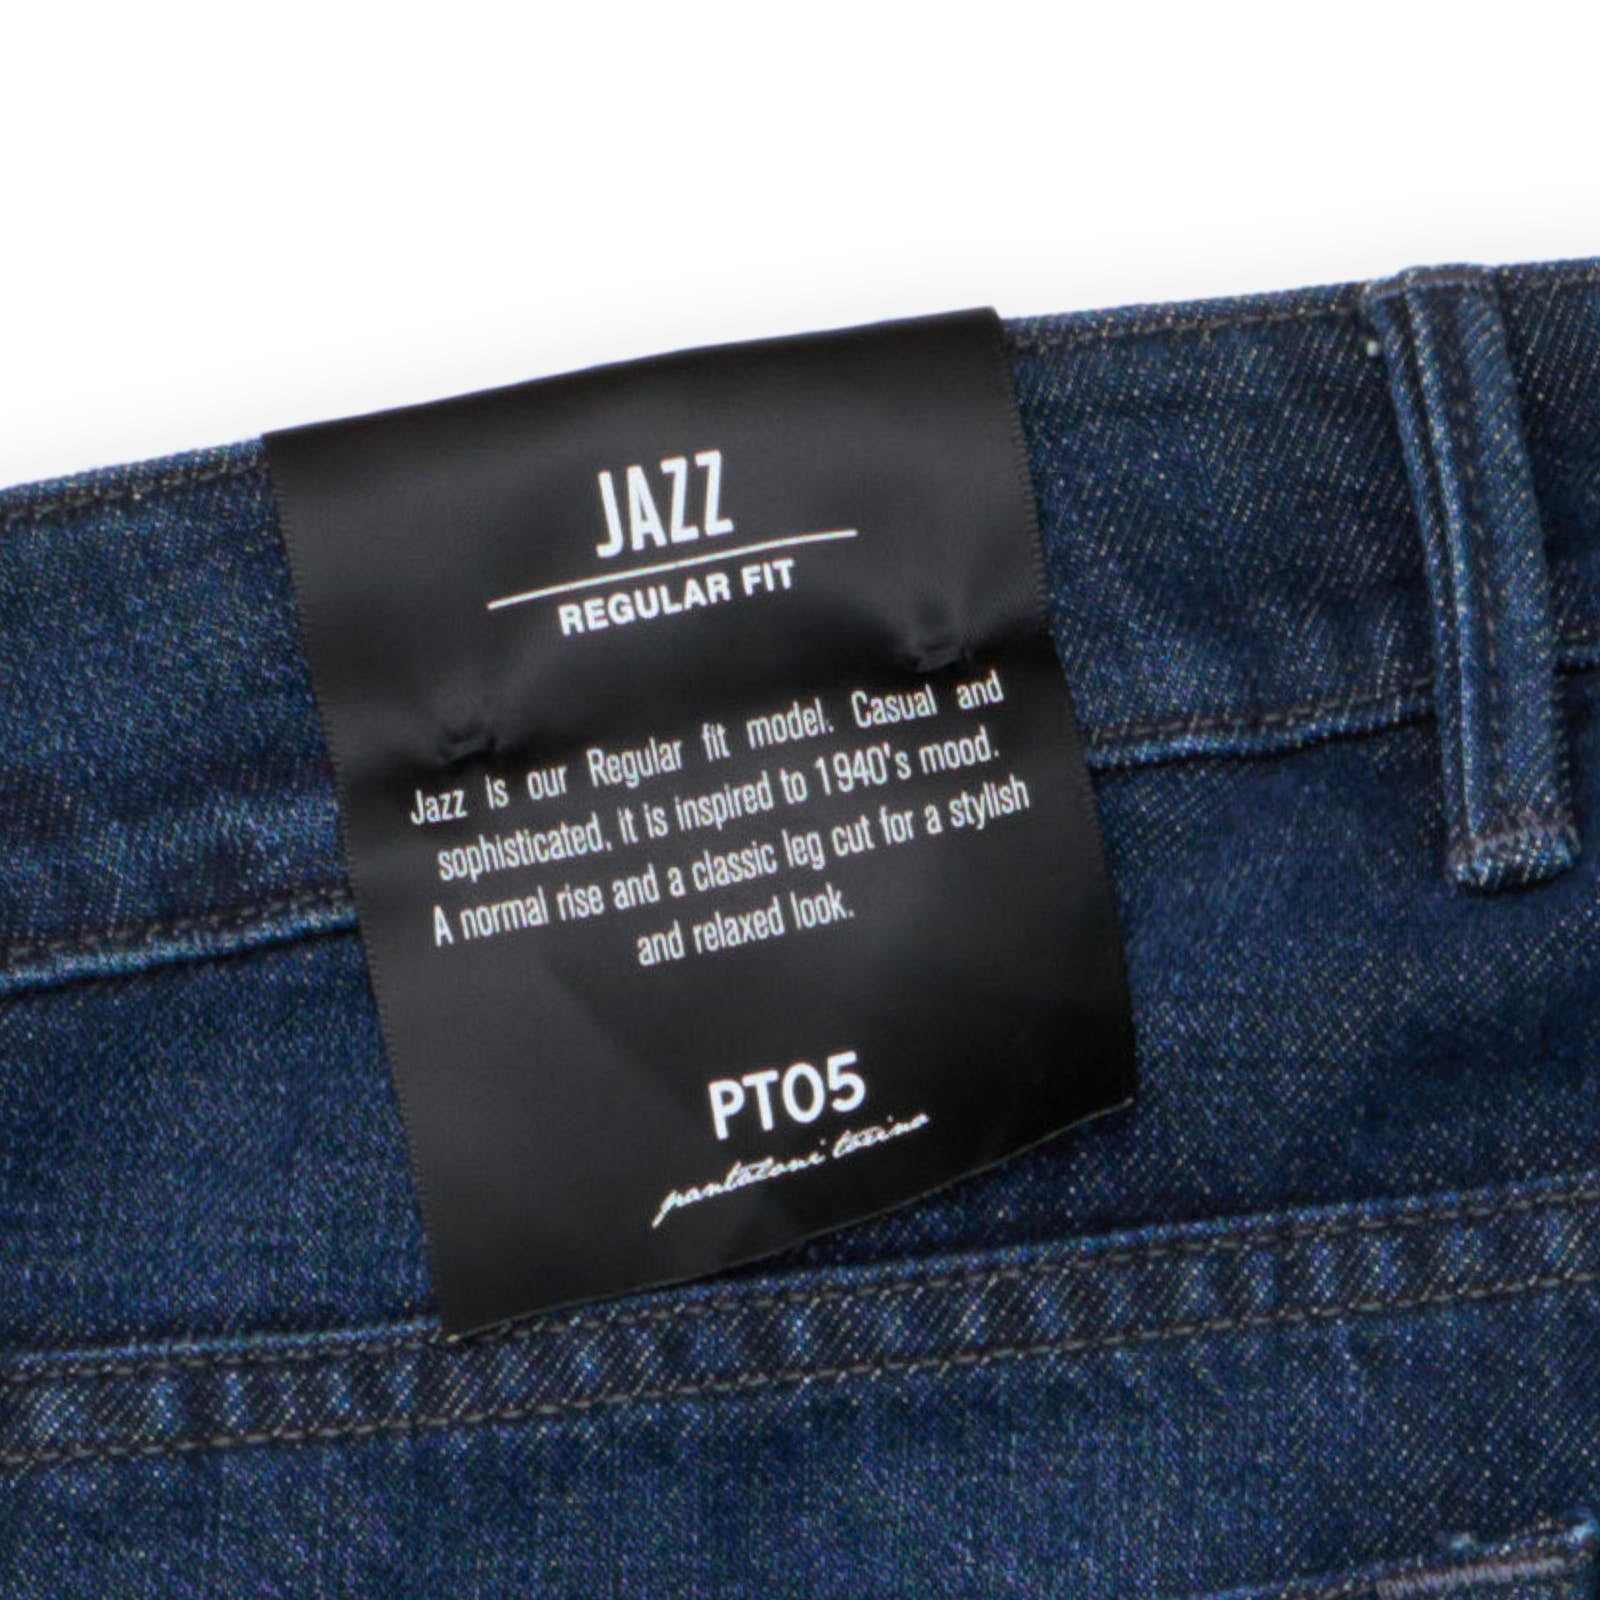 PT05 "Jazz" Indigo Blue Cotton-Lyocell Relaxed Fit Jeans NEW US